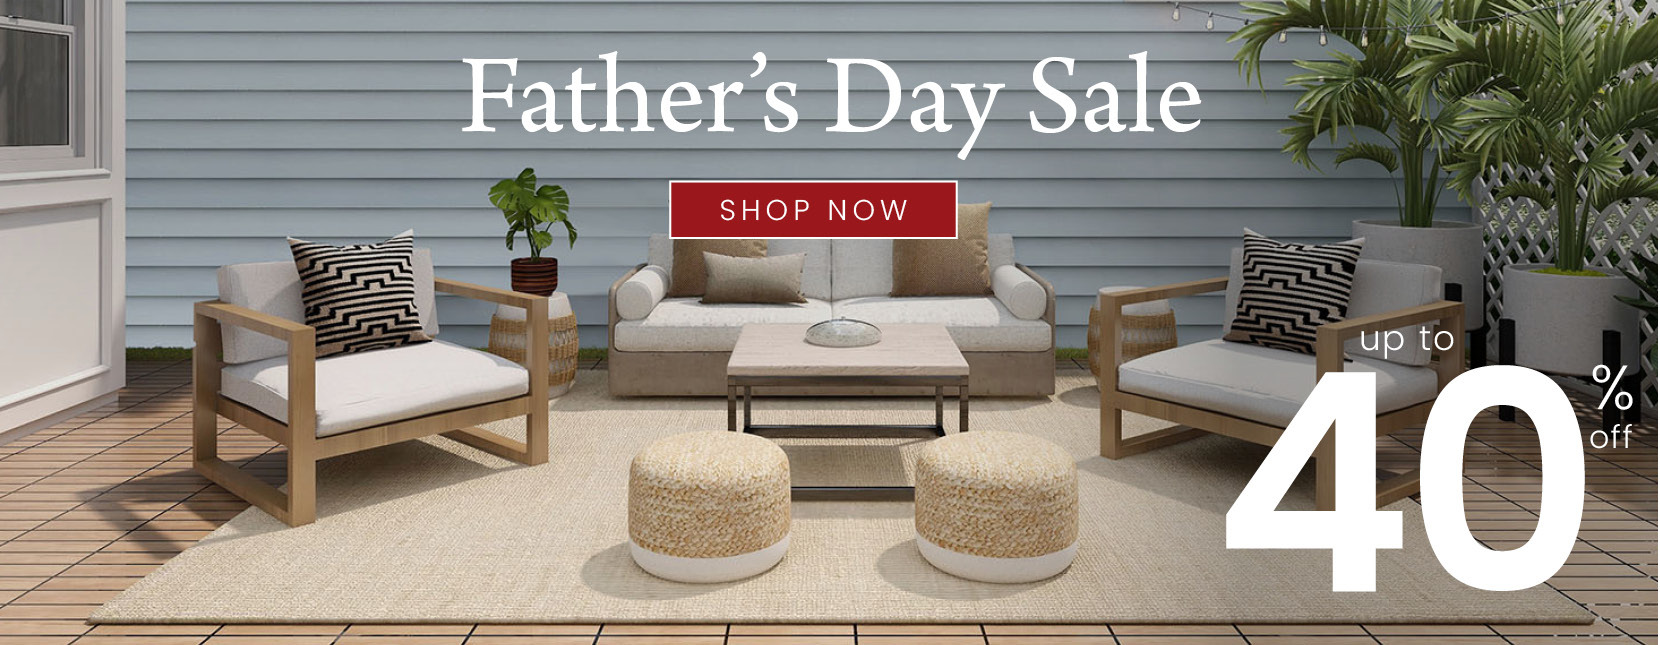 Father's Day Sale - Up to 40% off! Shop the Sale